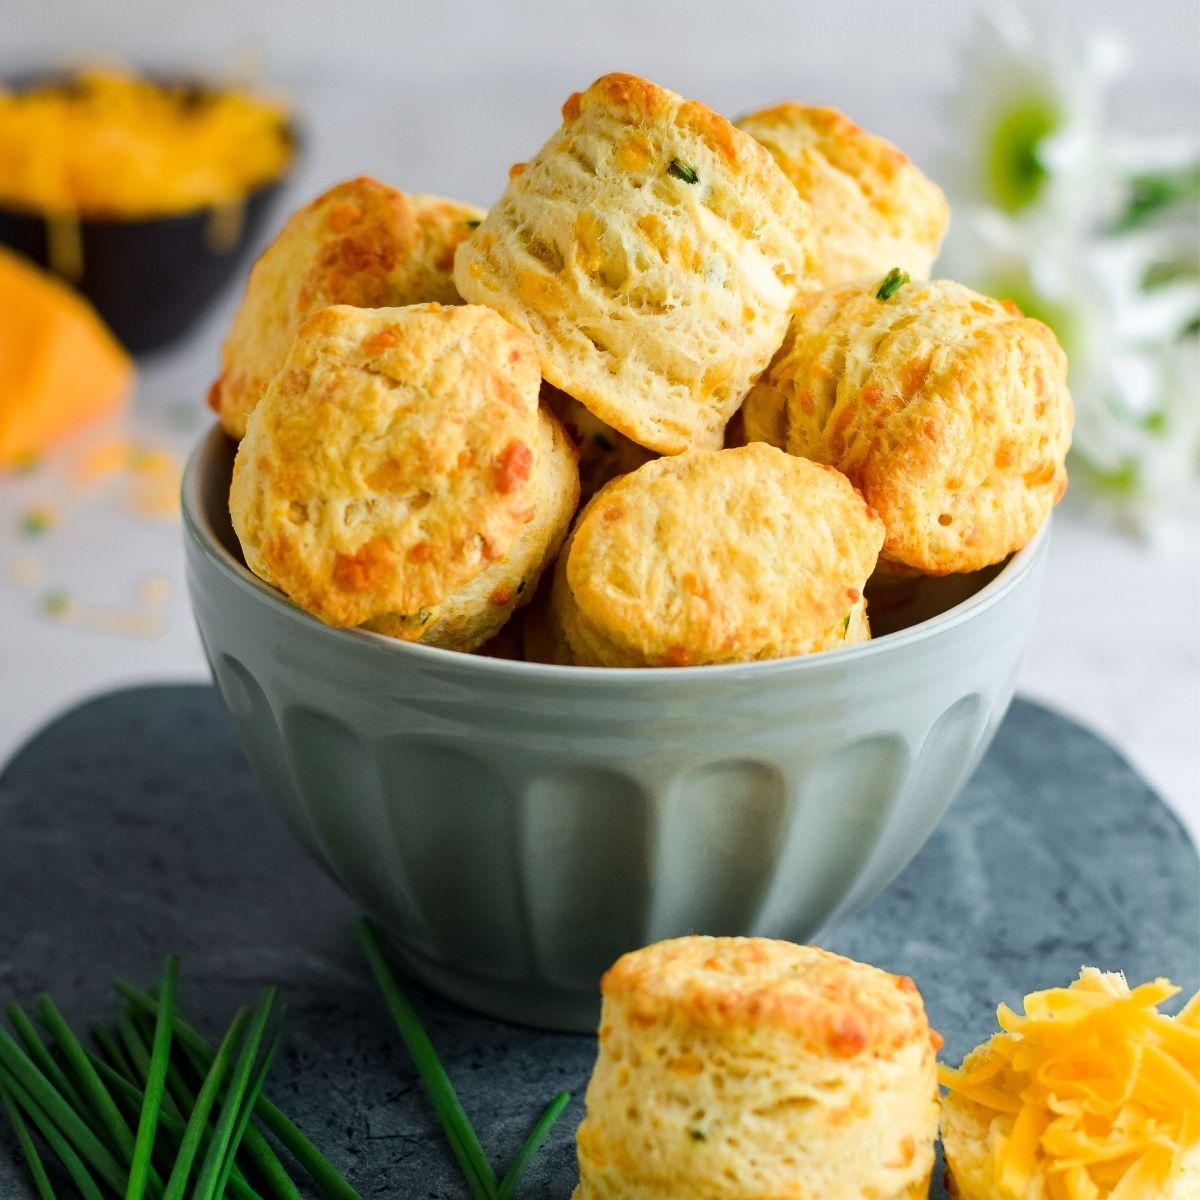 Tea Party Scones - Cheese and Chive Scones